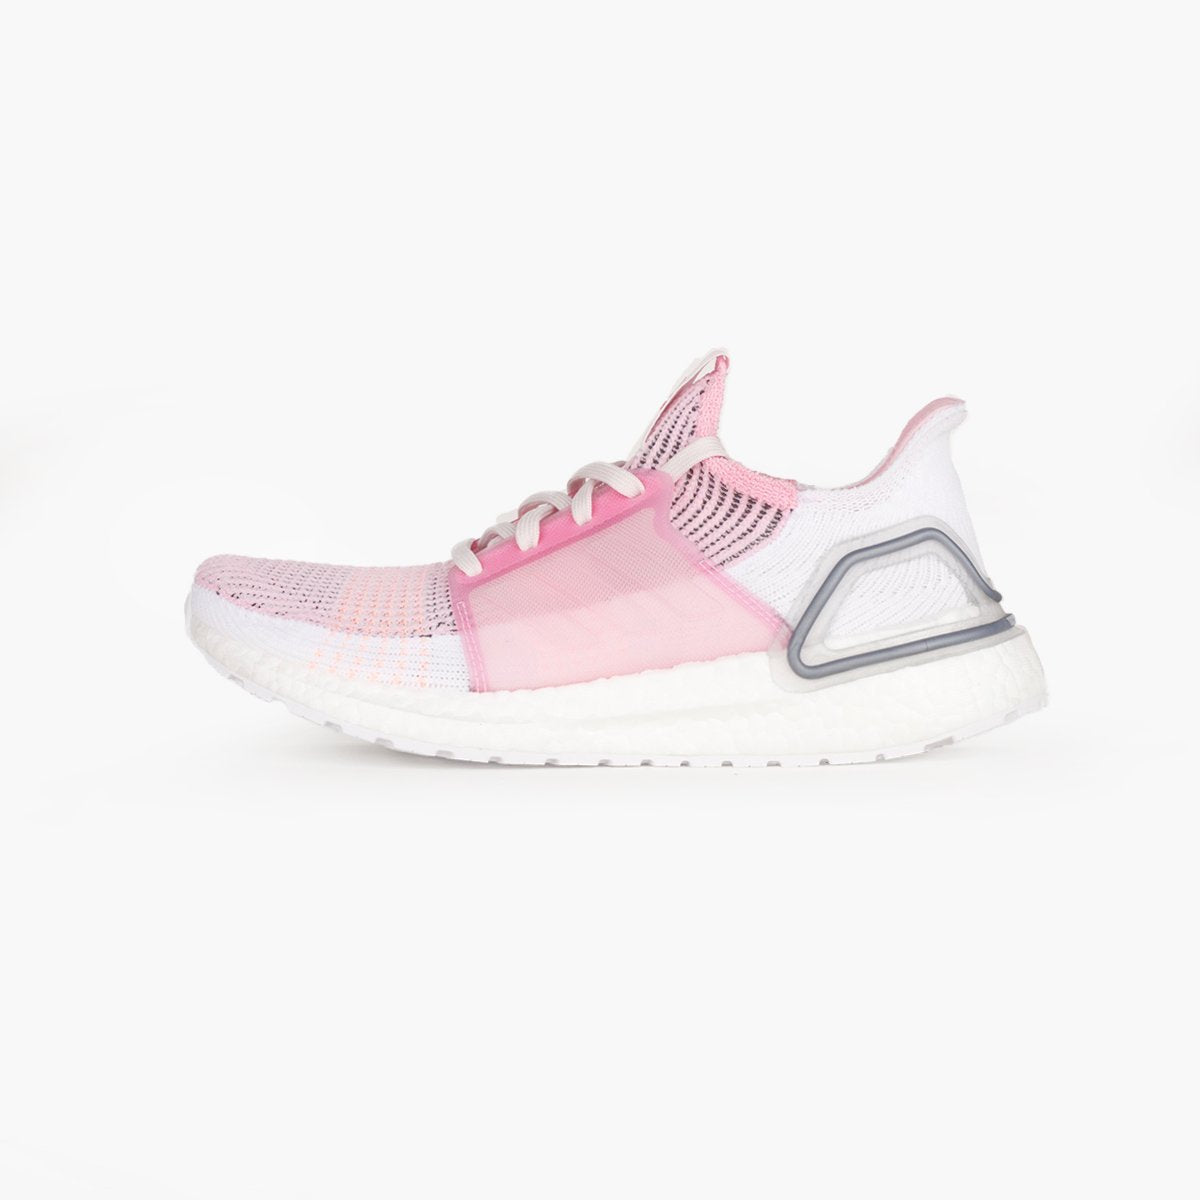 adidas Running Ultraboost 19 Womens-F35283-pink-9 us-SUEDE Store